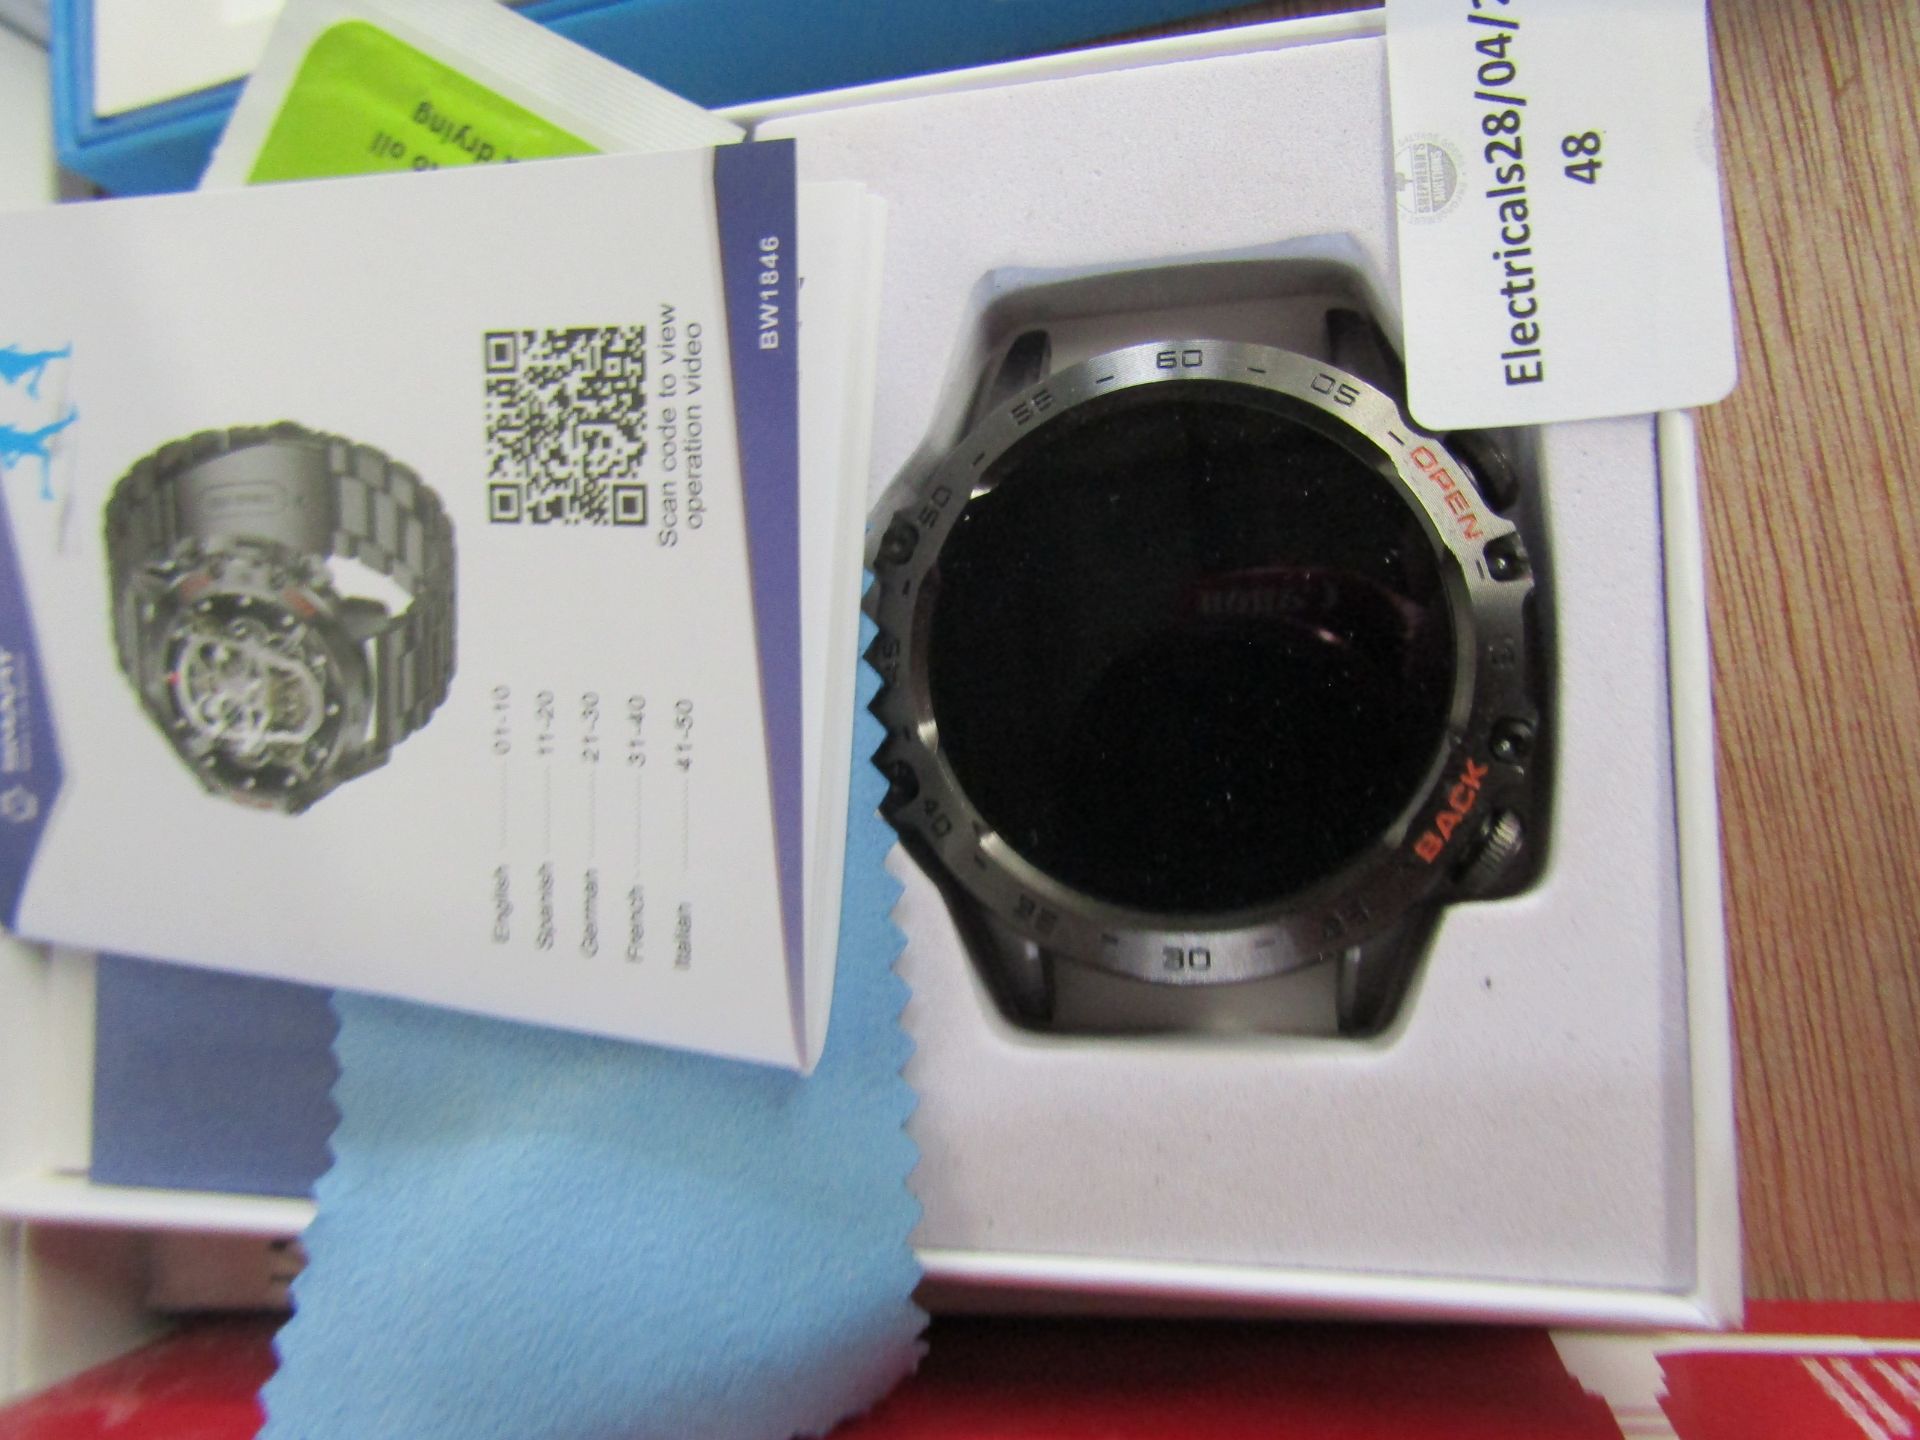 Smart Make Life Better Smart Watch For Men - Unchecked & Boxed.